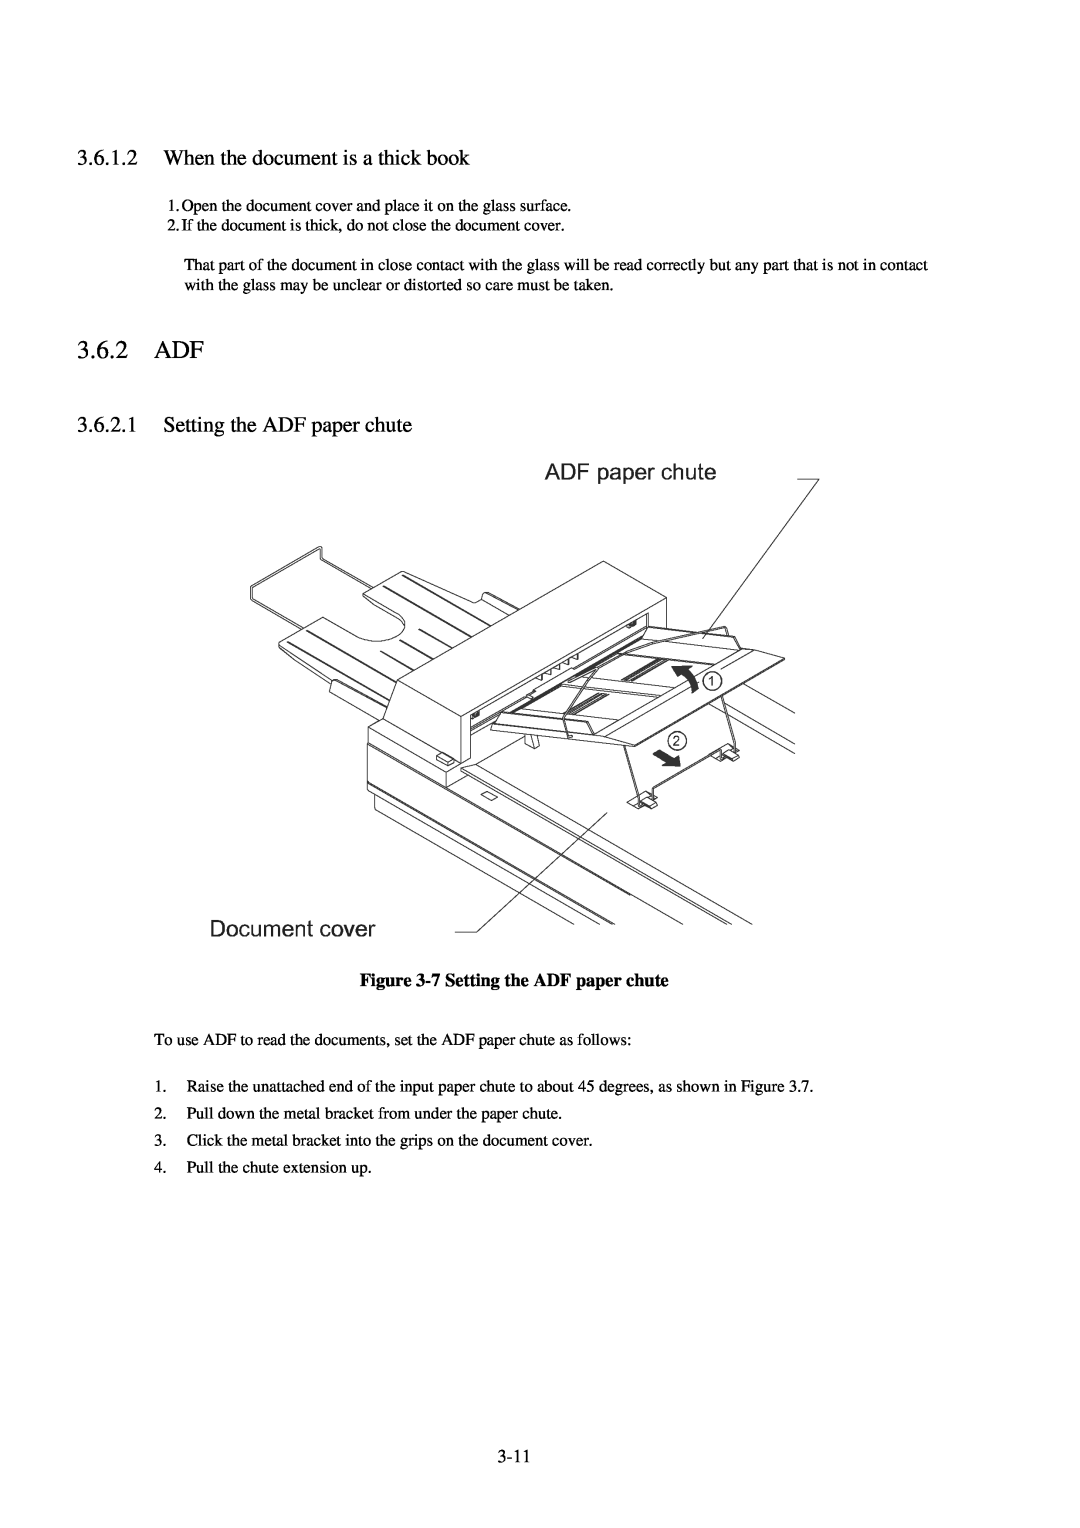 Fujitsu 600C manual 3.6.2 ADF, When the document is a thick book, 7 Setting the ADF paper chute 